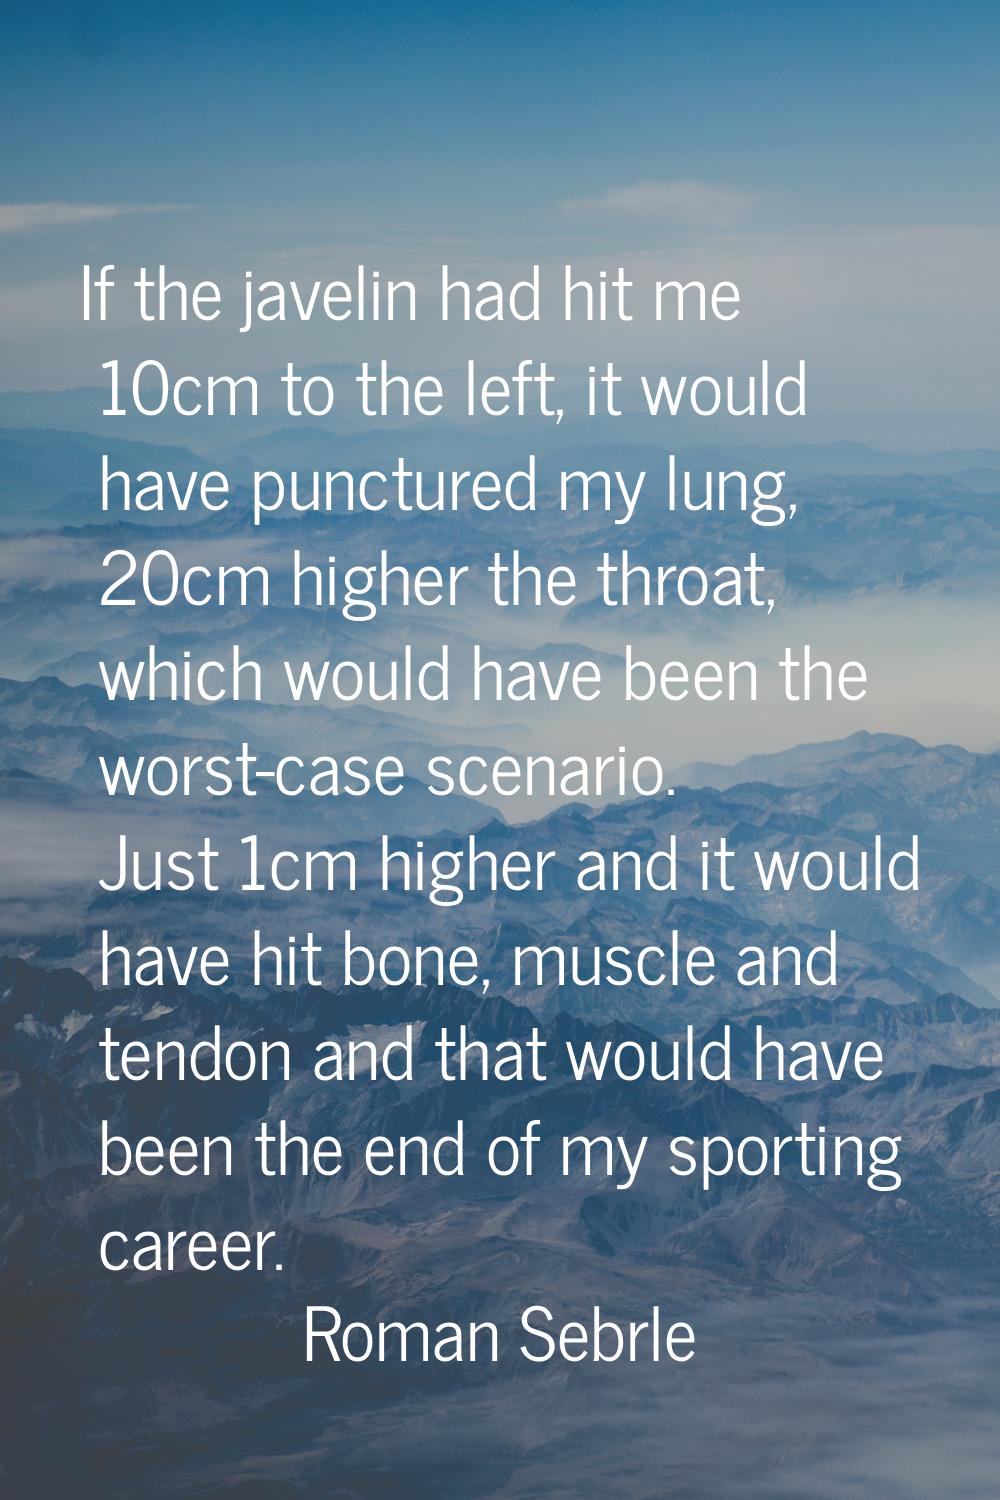 If the javelin had hit me 10cm to the left, it would have punctured my lung, 20cm higher the throat